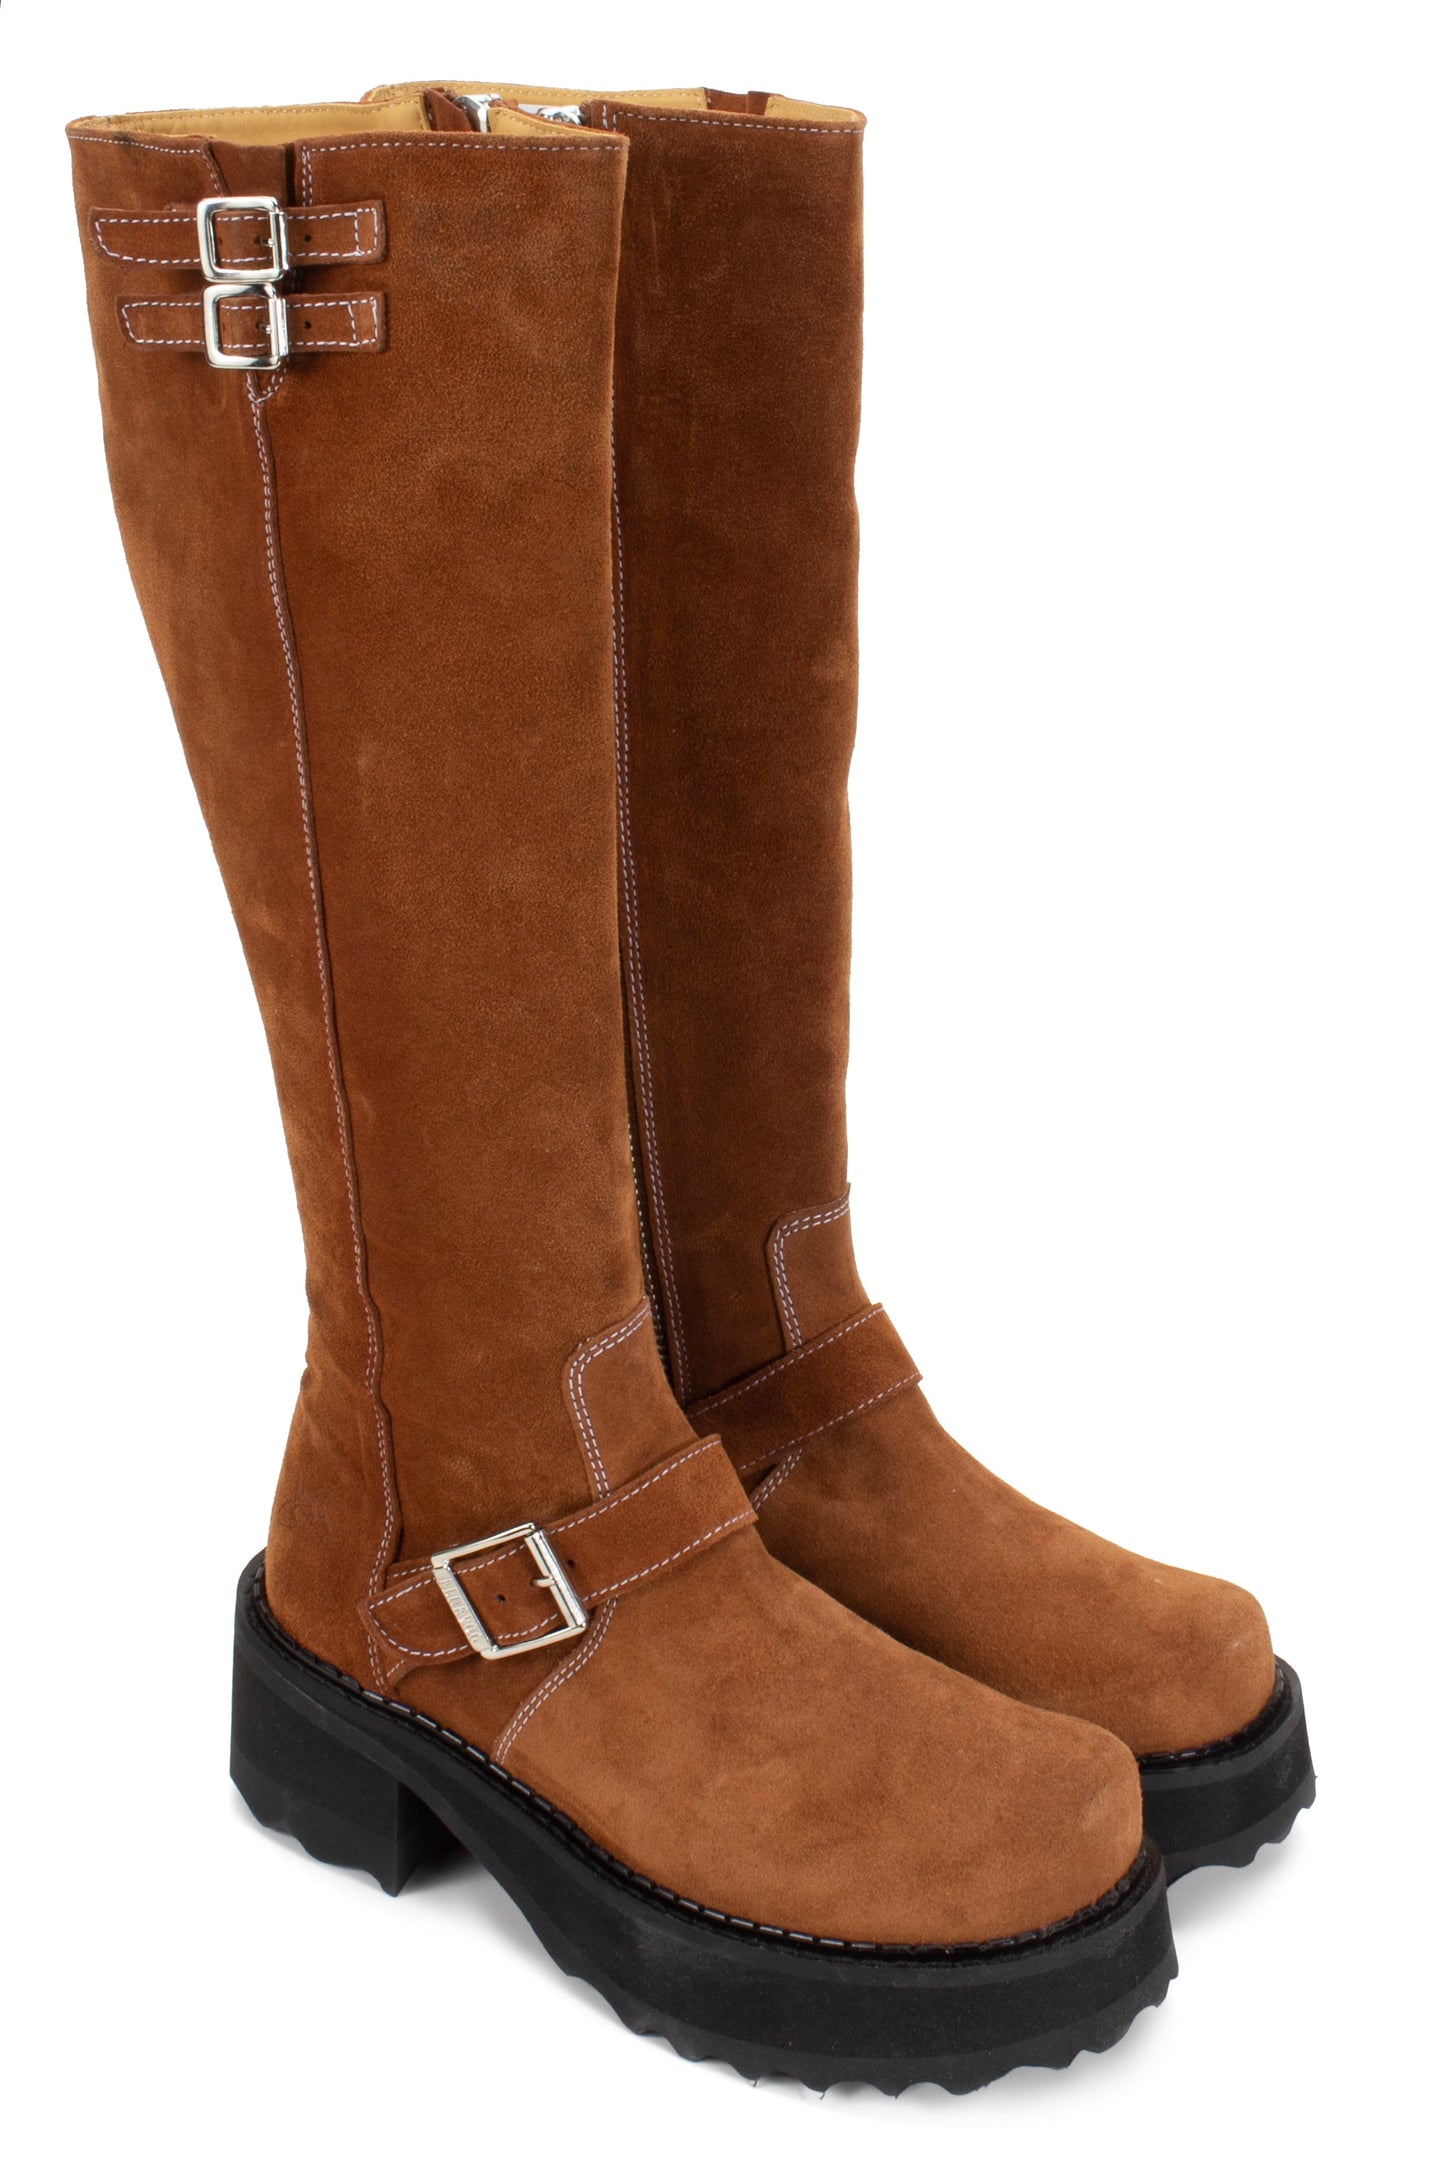 Brown suede Boot, under-the-knee, 2 buckles at top, 1 on foot with large belt, high heel 